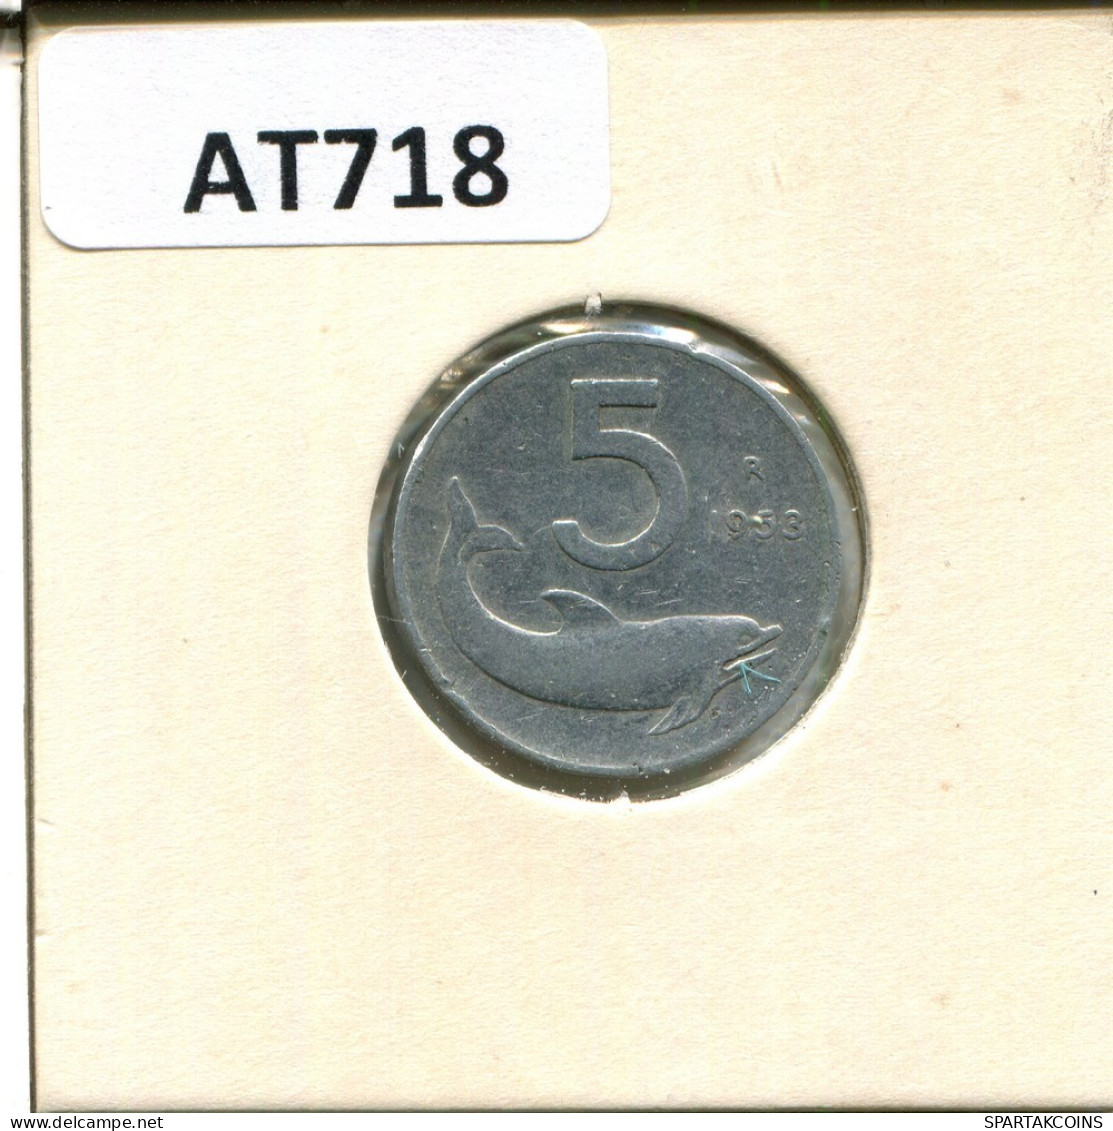 5 LIRE 1953 ITALY Coin #AT718.U.A - 5 Lire